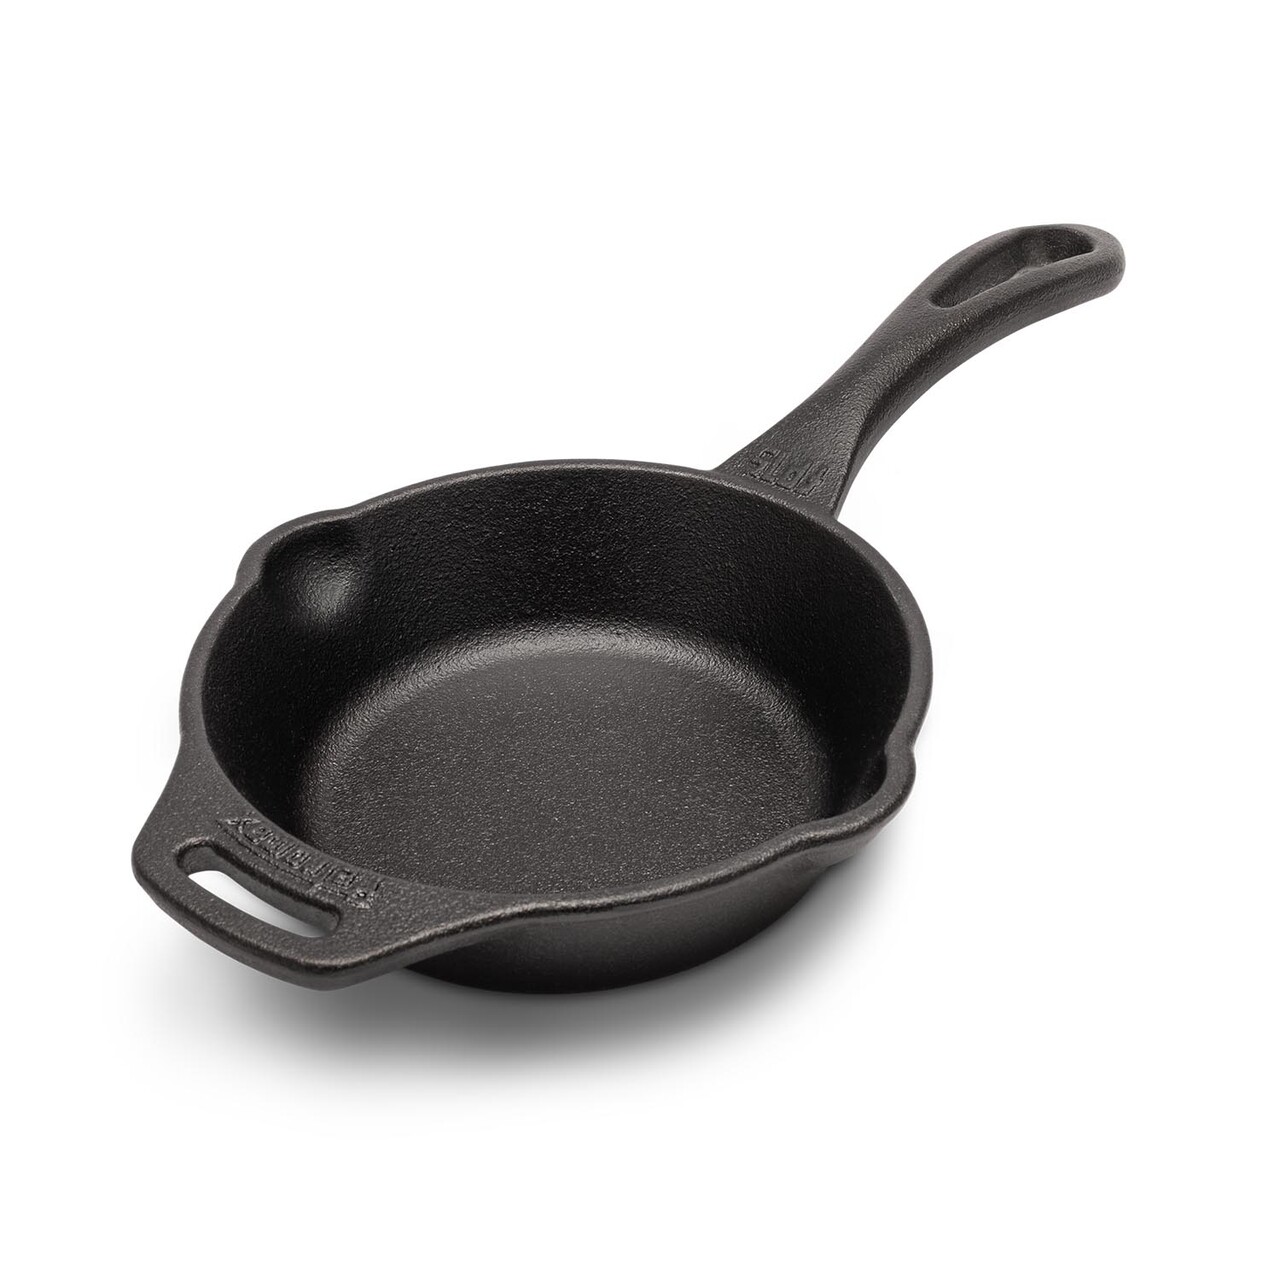 Petromax Fire Skillet Fp15 With One Pan Handle